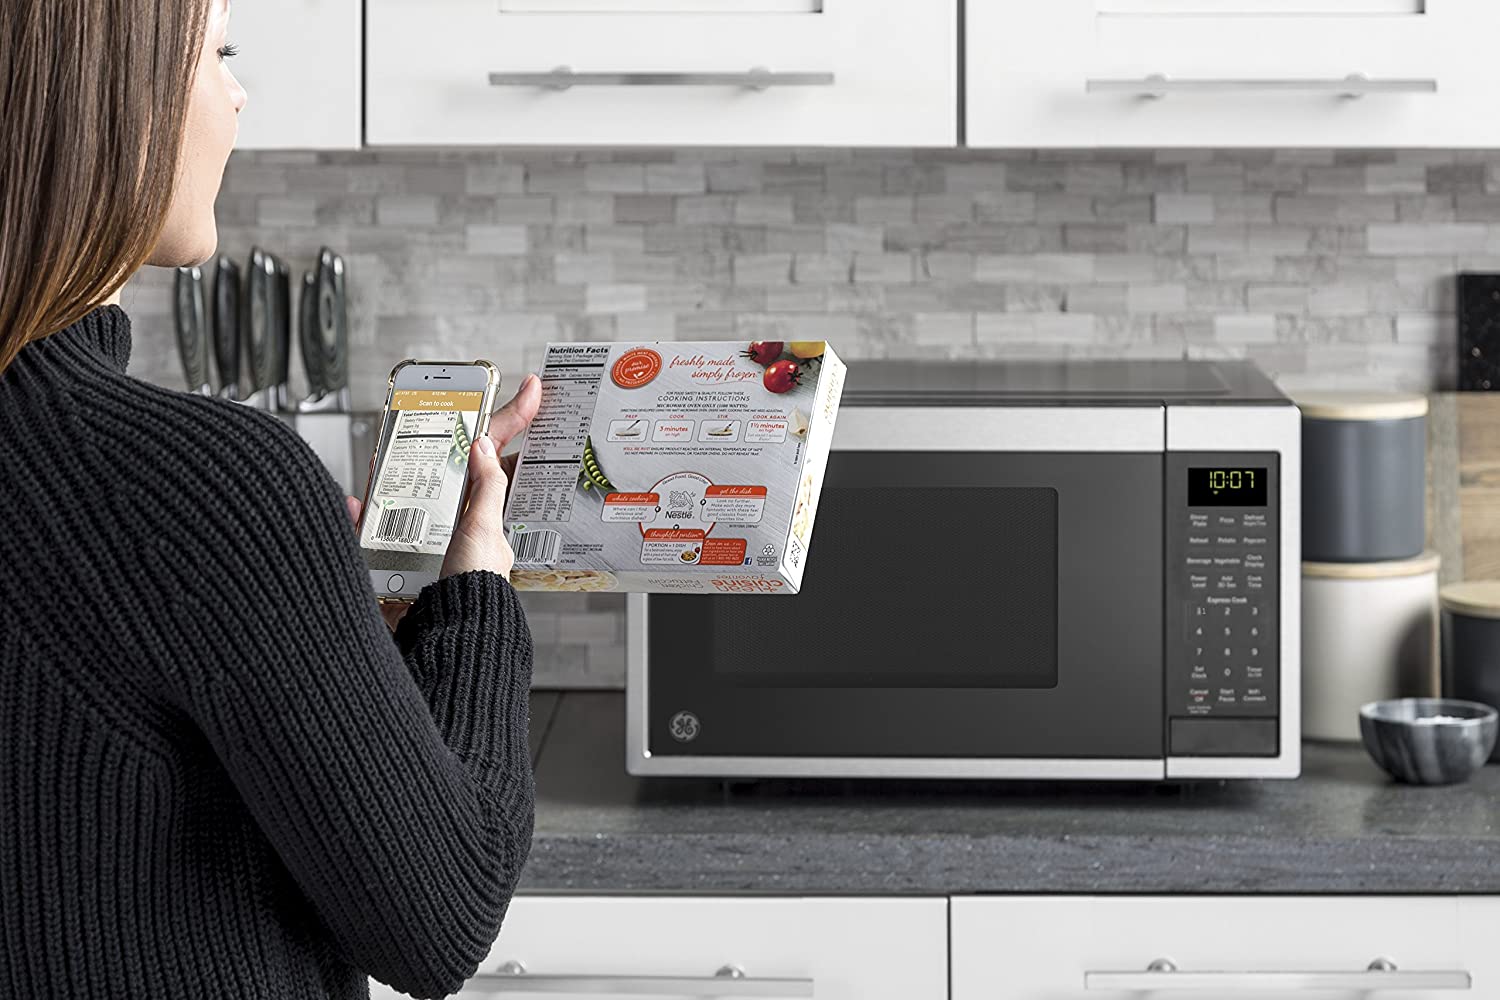 Best Smart Microwave Ovens With Alexa Support